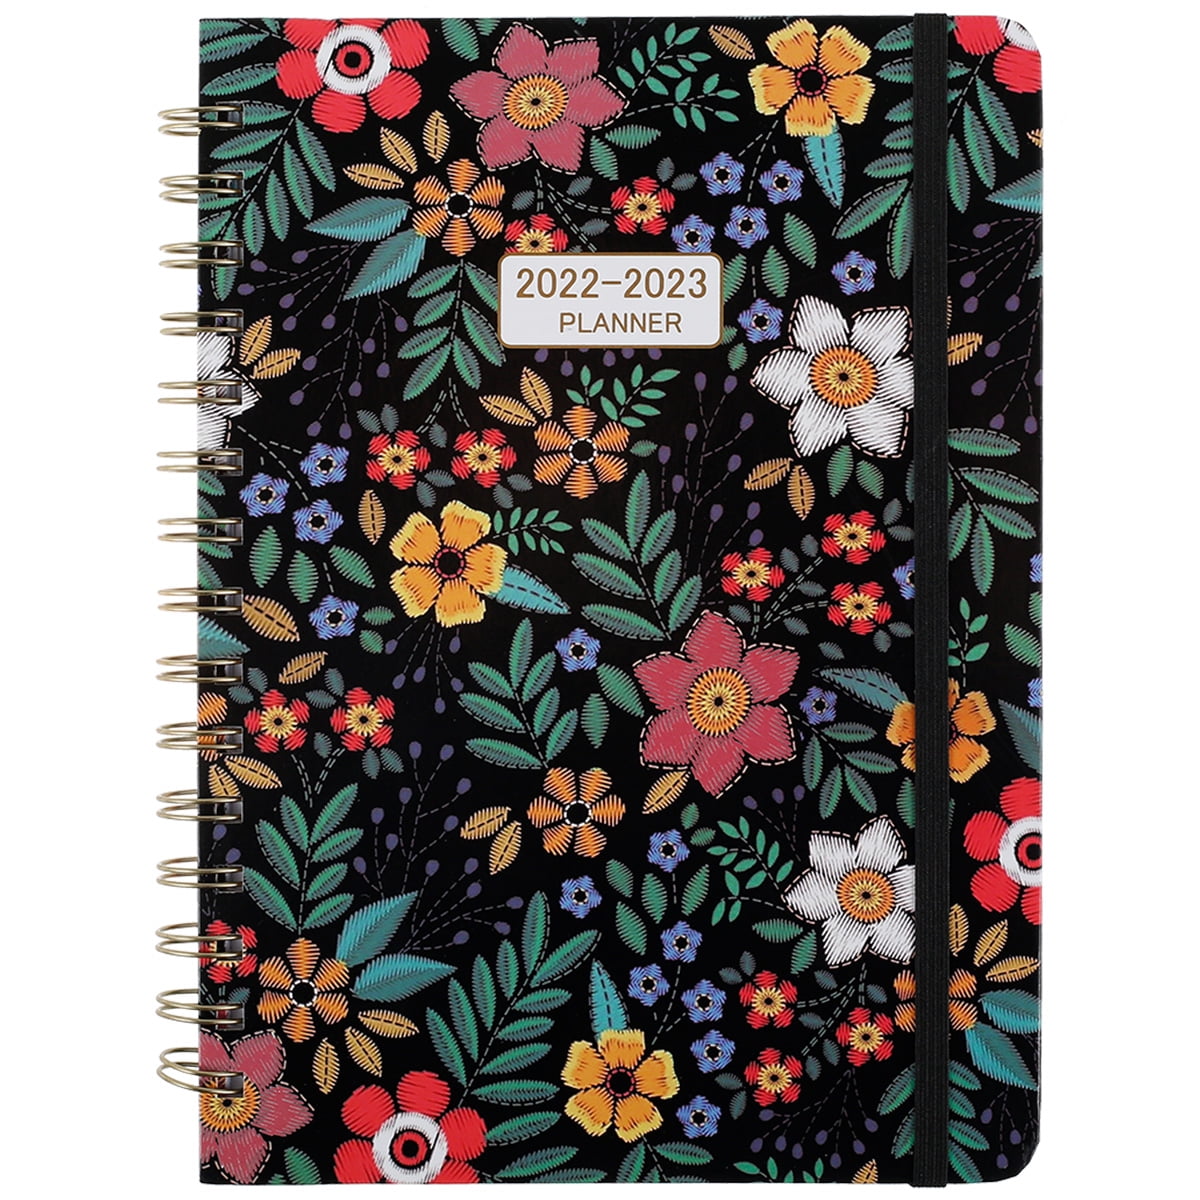 2022 Planner Weekly and Monthly with Twin-Wire Binding 2022 Planner Beautiful Flowers January December 2022 Planner 2022 with Flexible Cover 8 x 10 